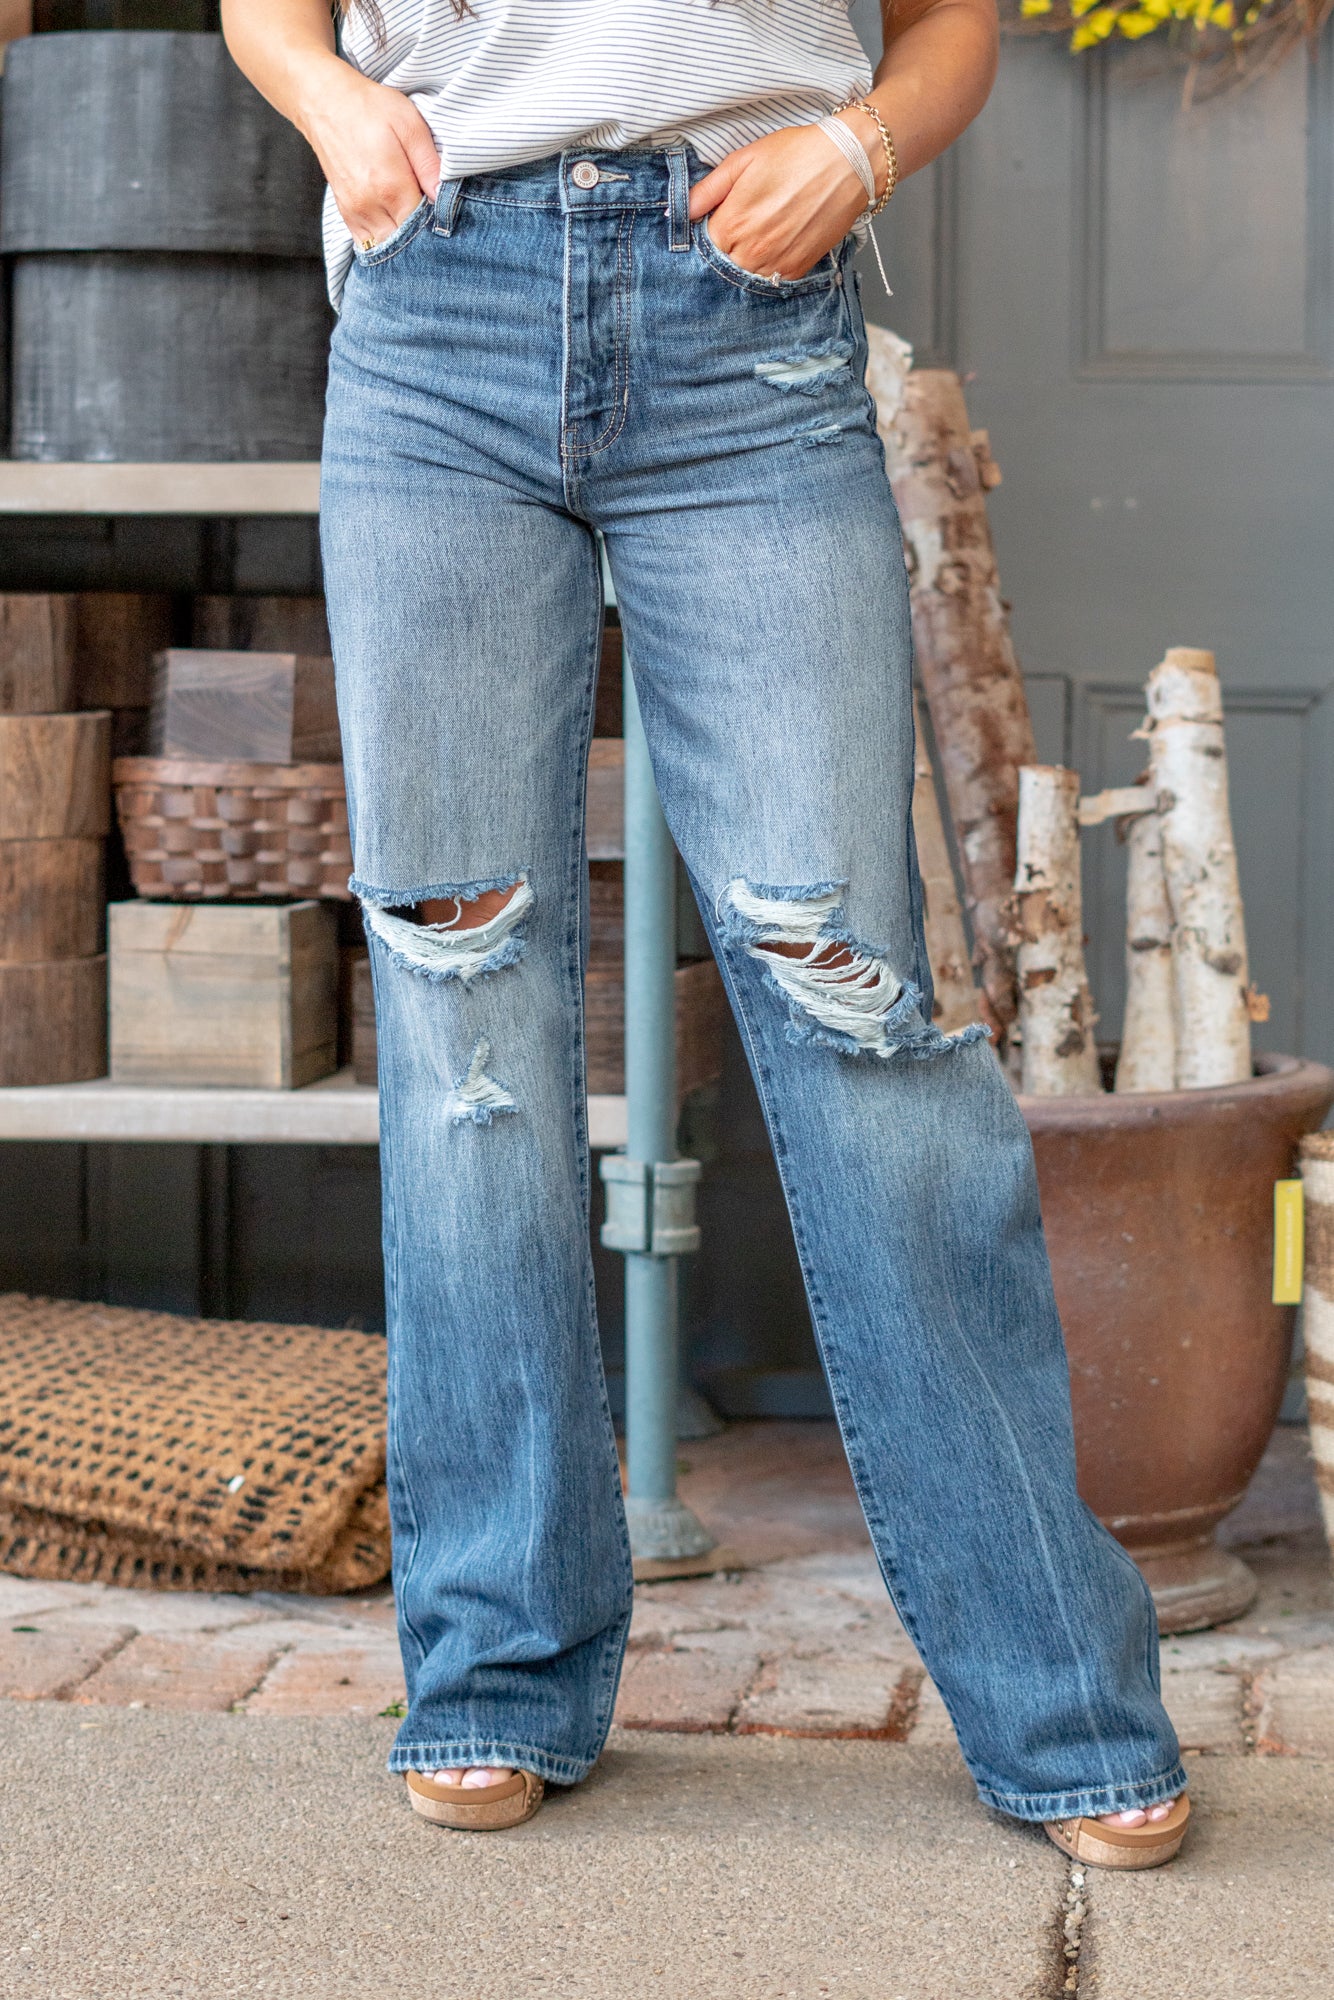 American Blues KanCan Jeans Rawlins High Rise Distressed 90s Flare